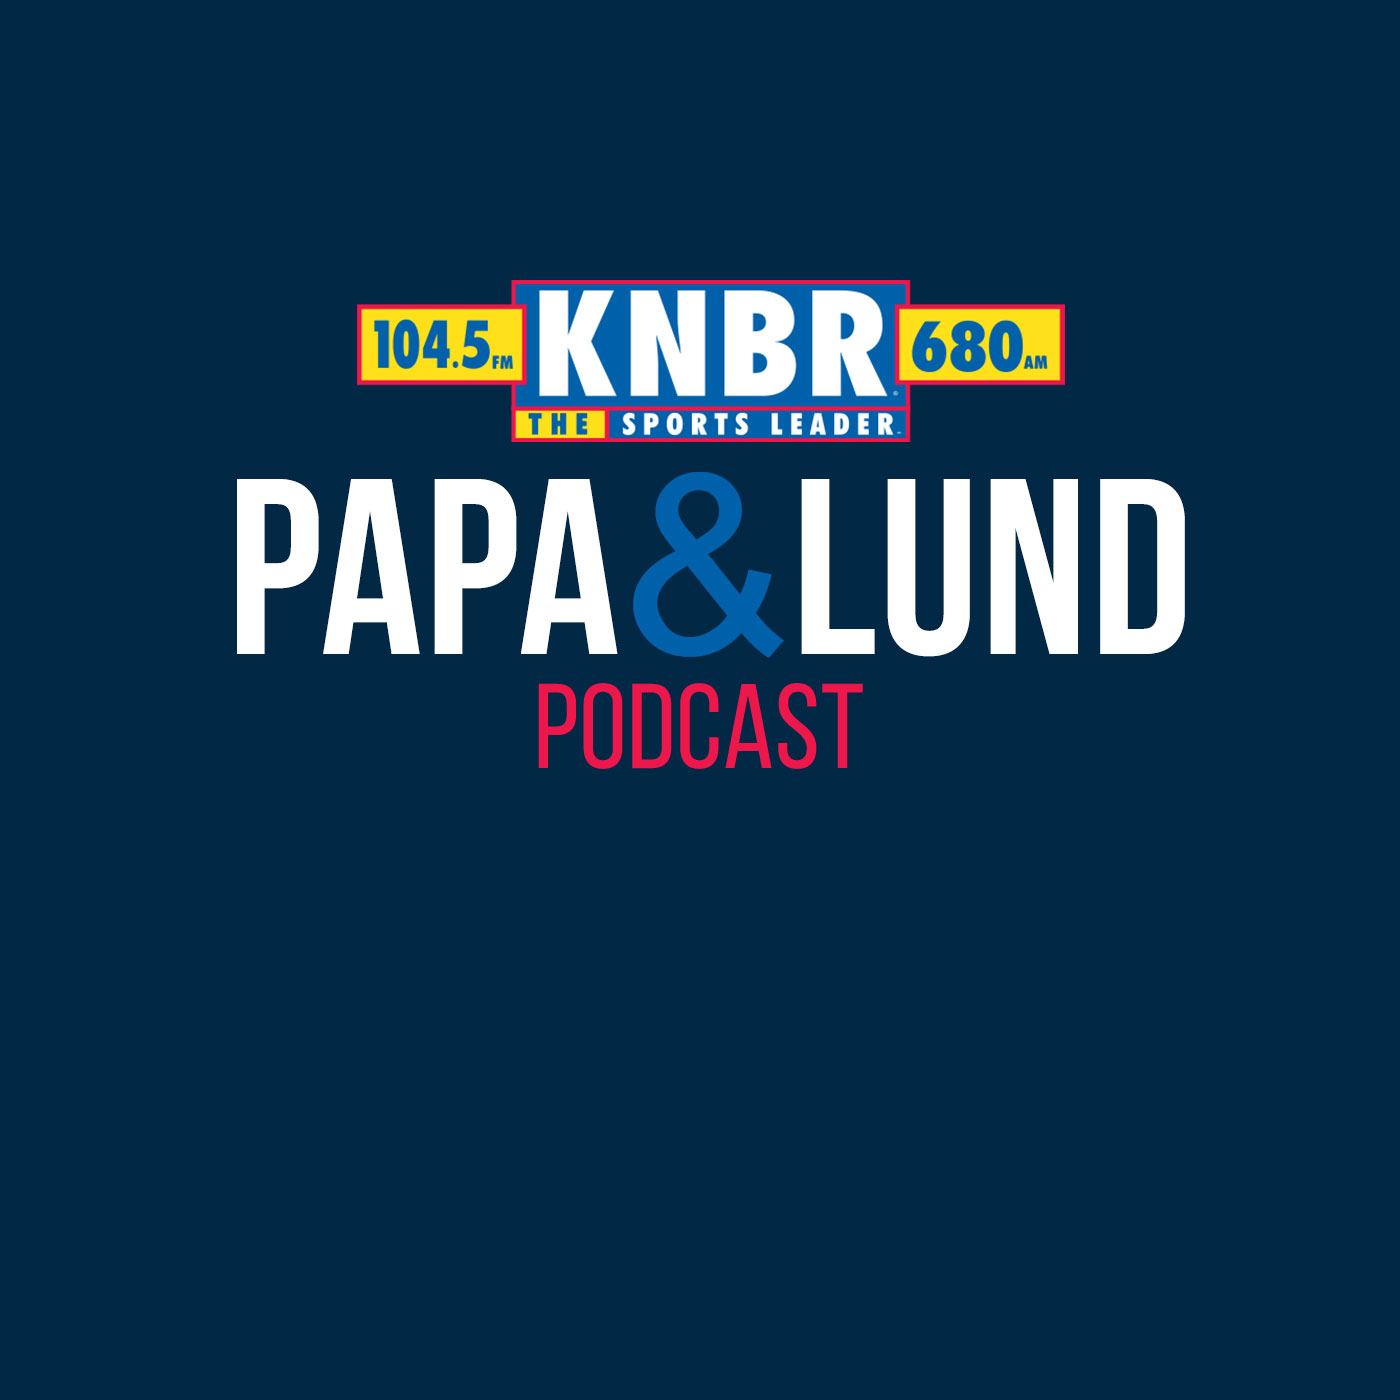 4-19 Andrew Baggarly joins Papa & Lund to discuss Blake Snell's start to the season and the Giants offense coming around